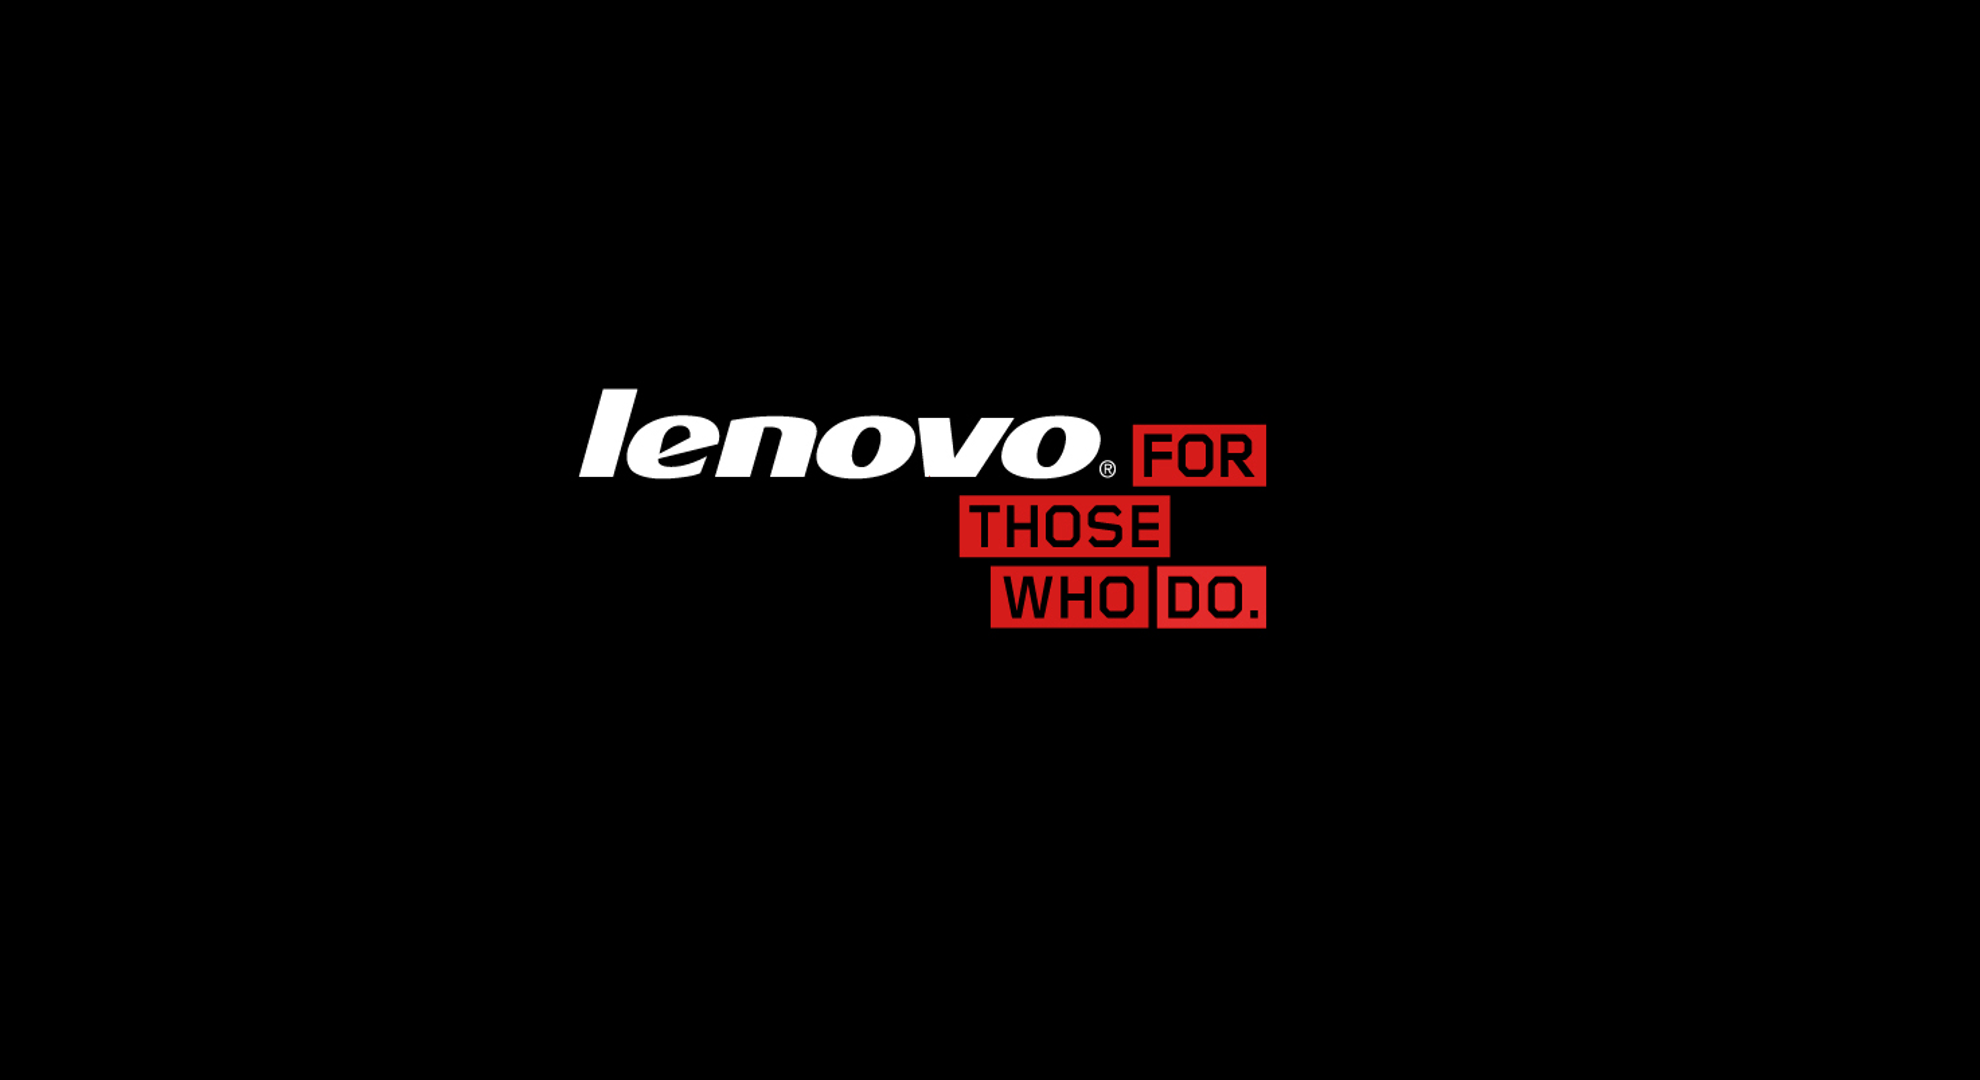 Related Pictures Ibm Lenovo Thinkpad Wallpaper The